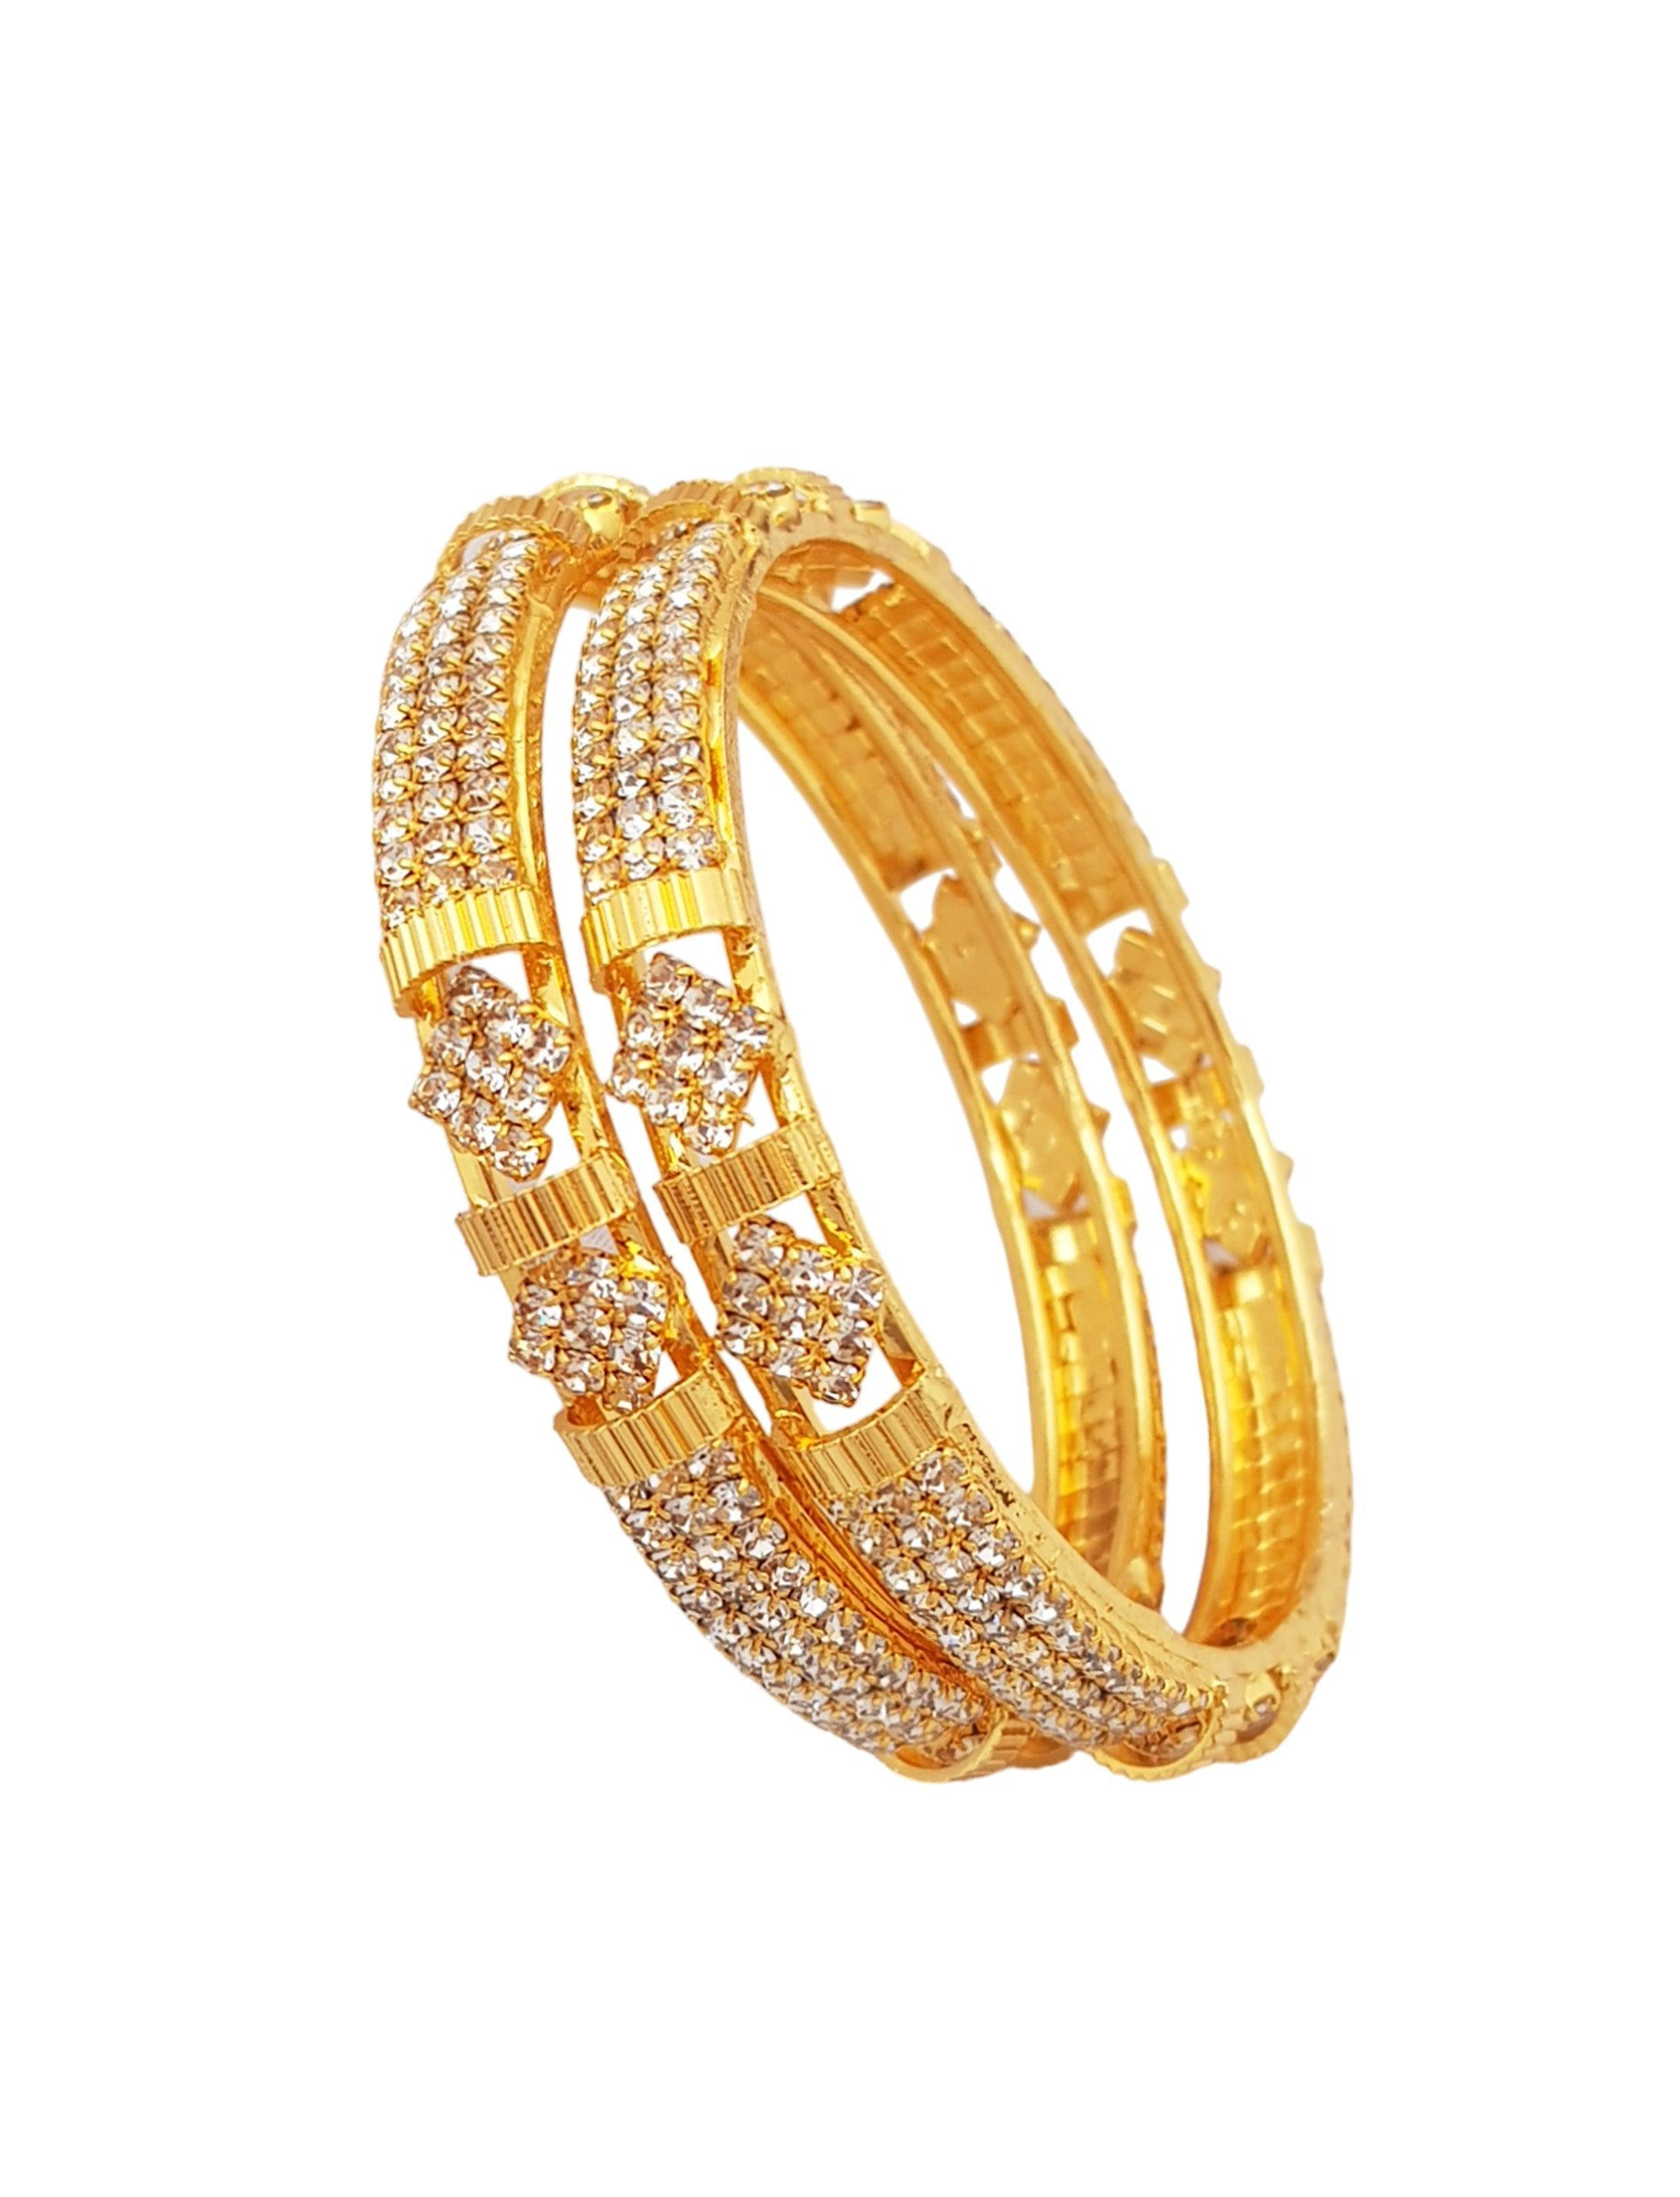 Gold Plated Studded Set of 2 bangles - Griiham